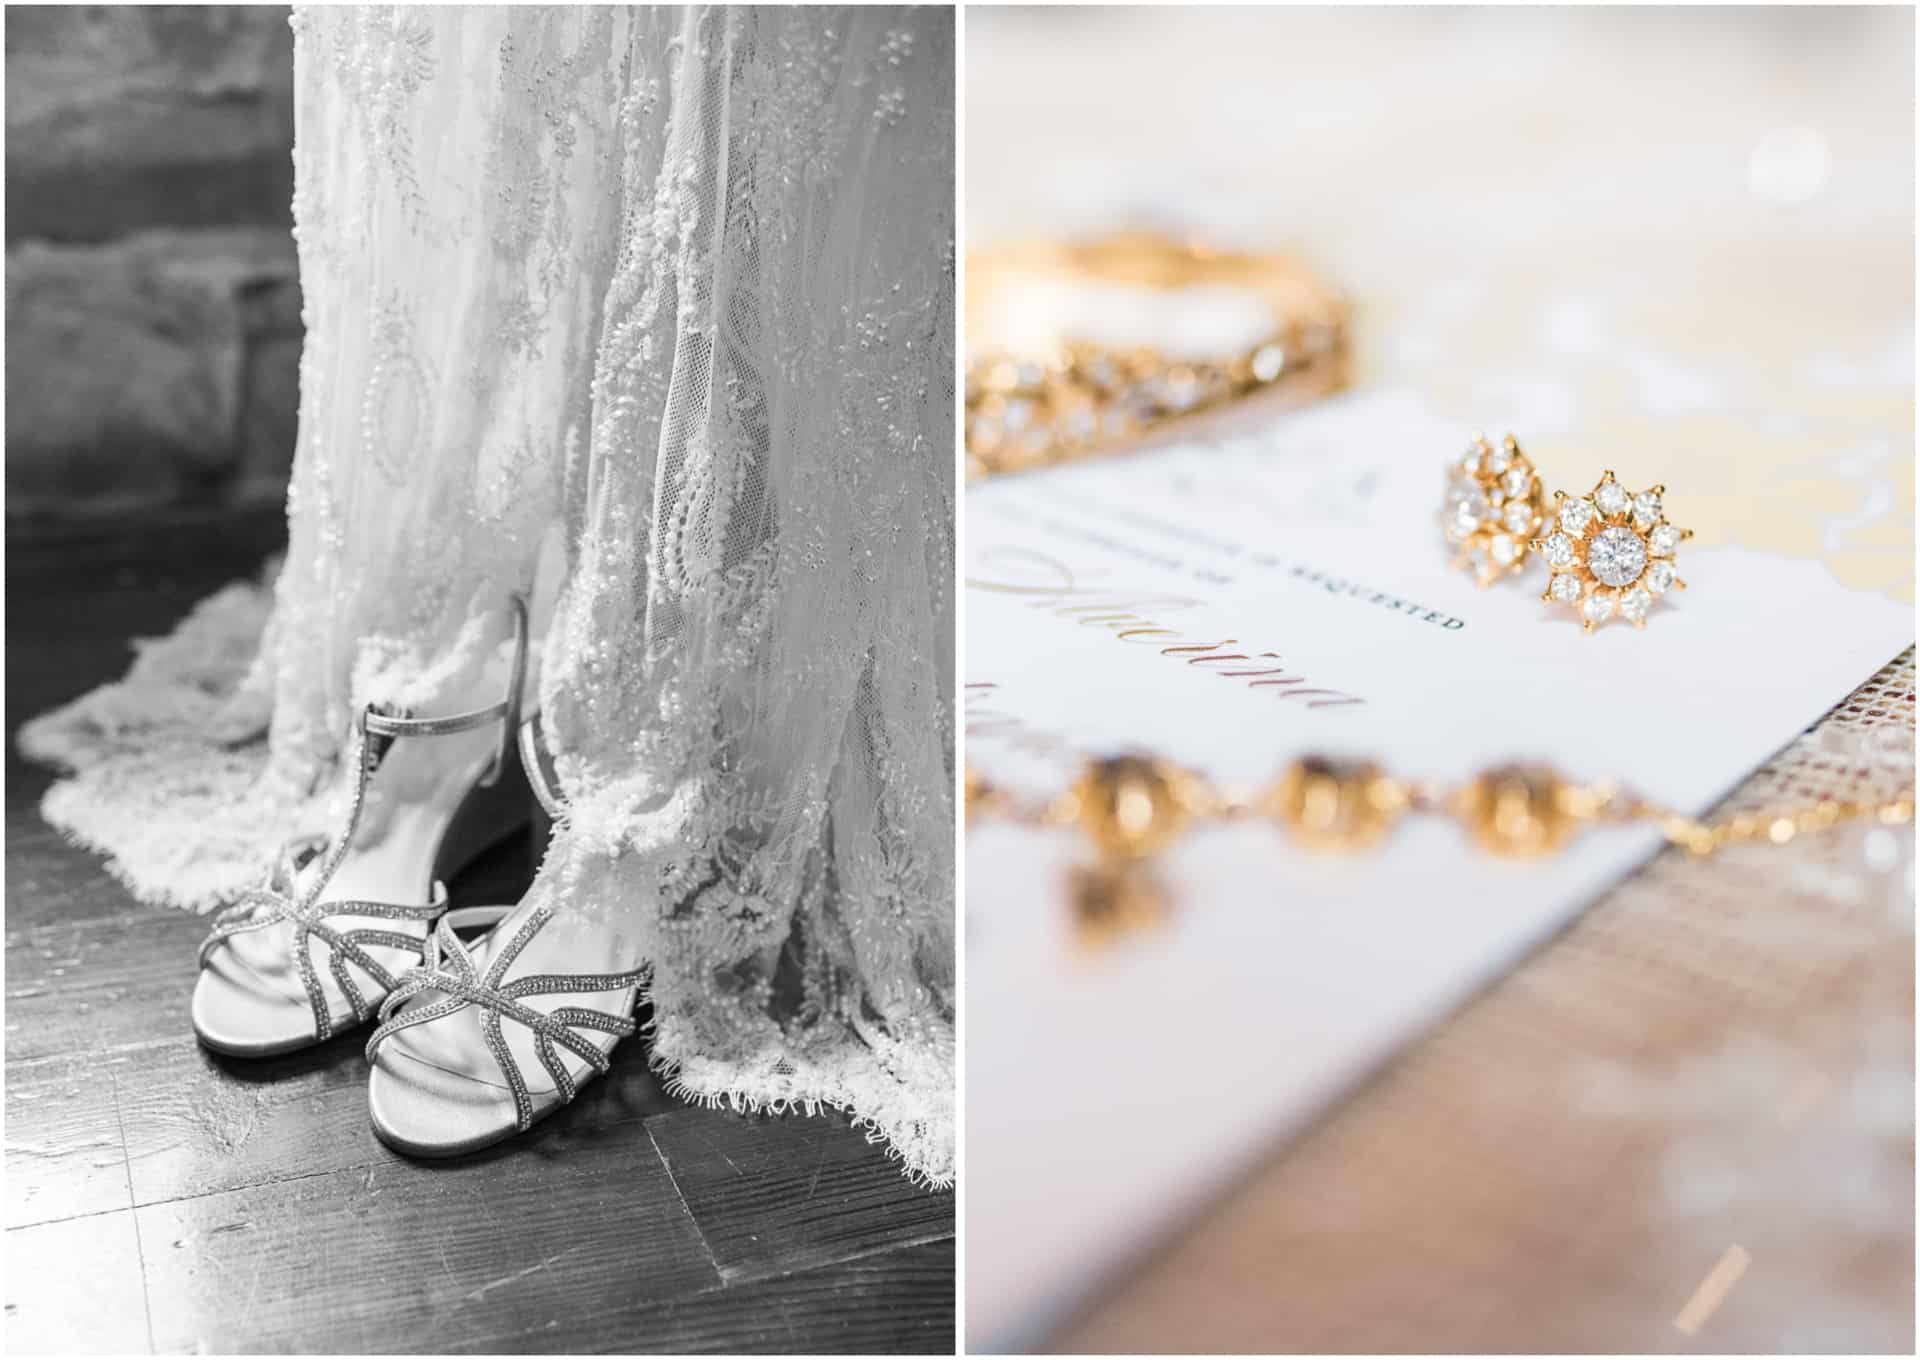 Nadia and Atte - Indonesian Bridal Details Shoes and Jewelry